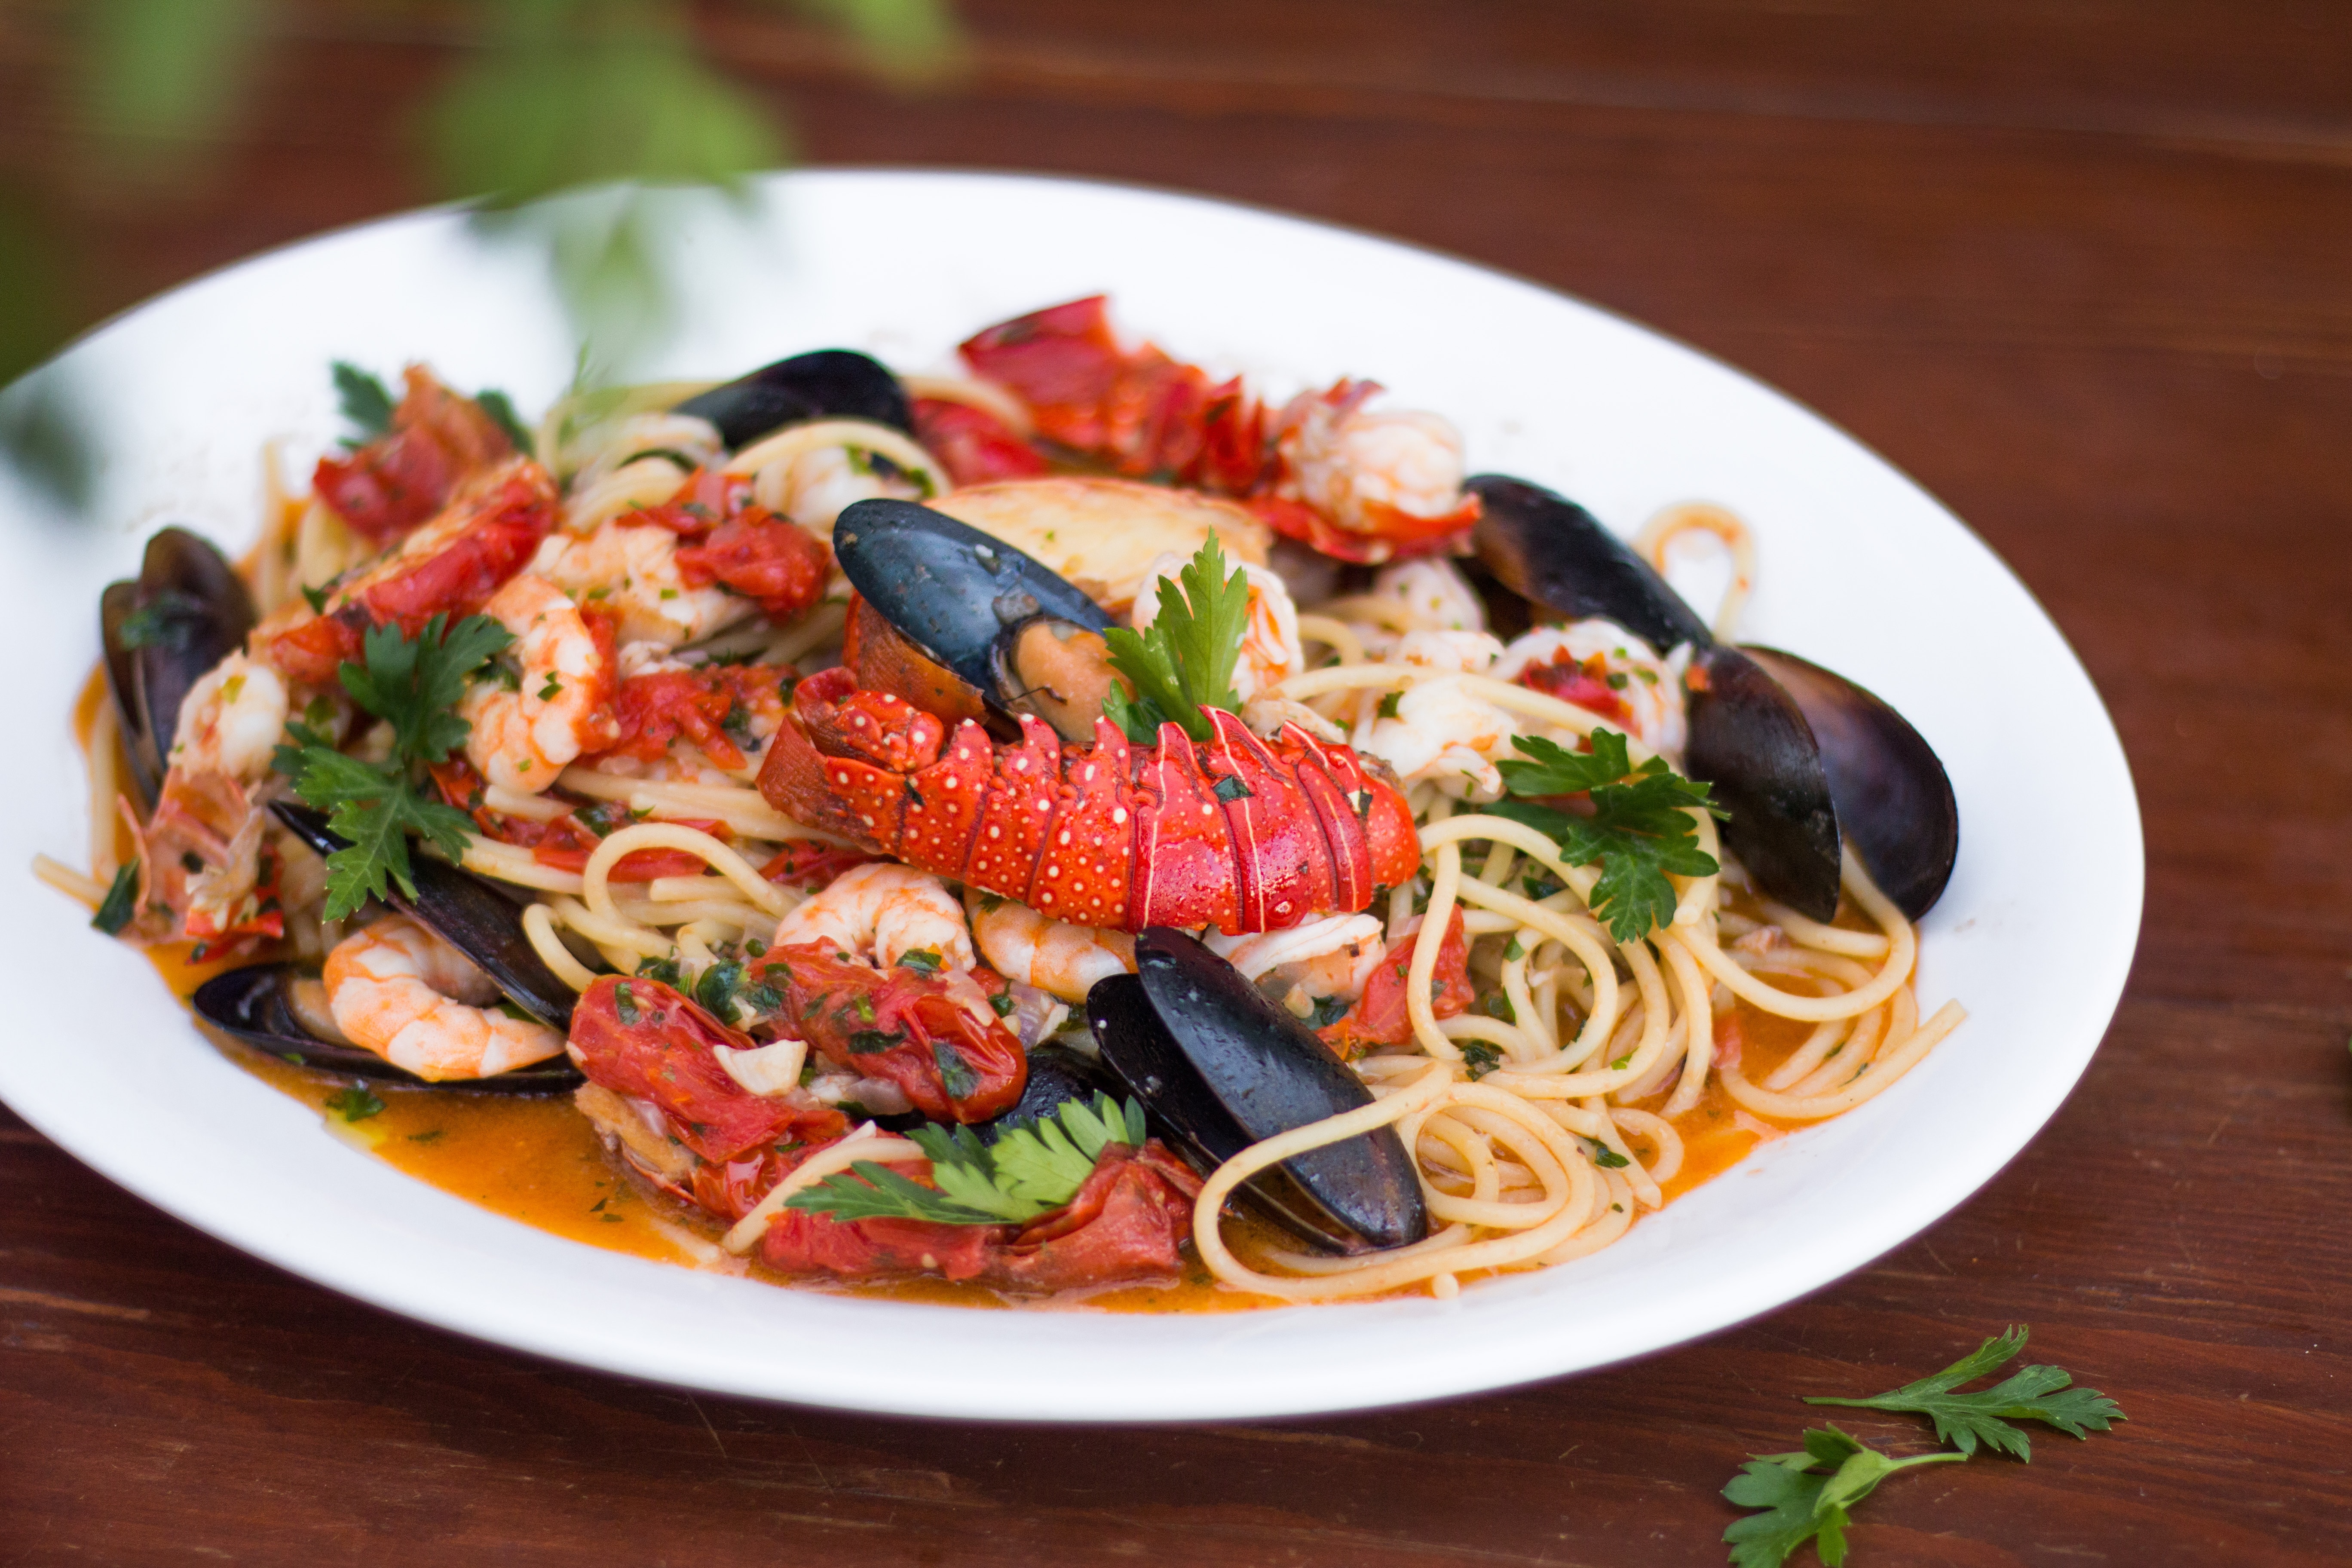 A dish of seafood pasta served on a white plate.